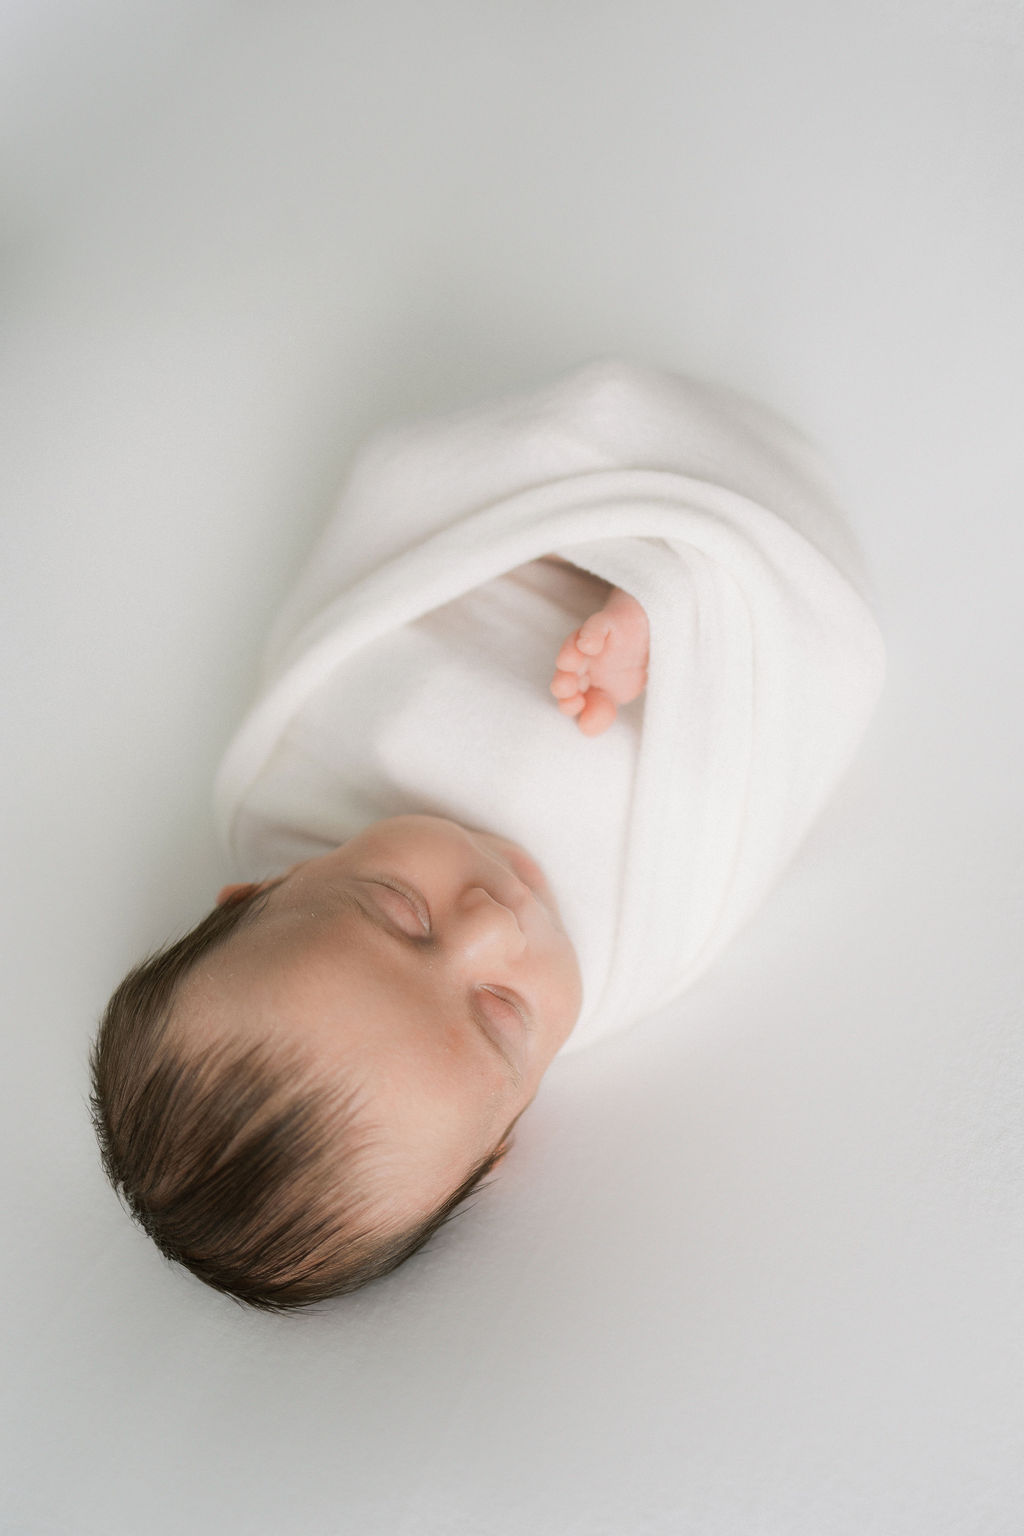 A newborn baby sleeps in a white swaddle with 1 foot sticking out the middle before meeting a pediatric dentist nj